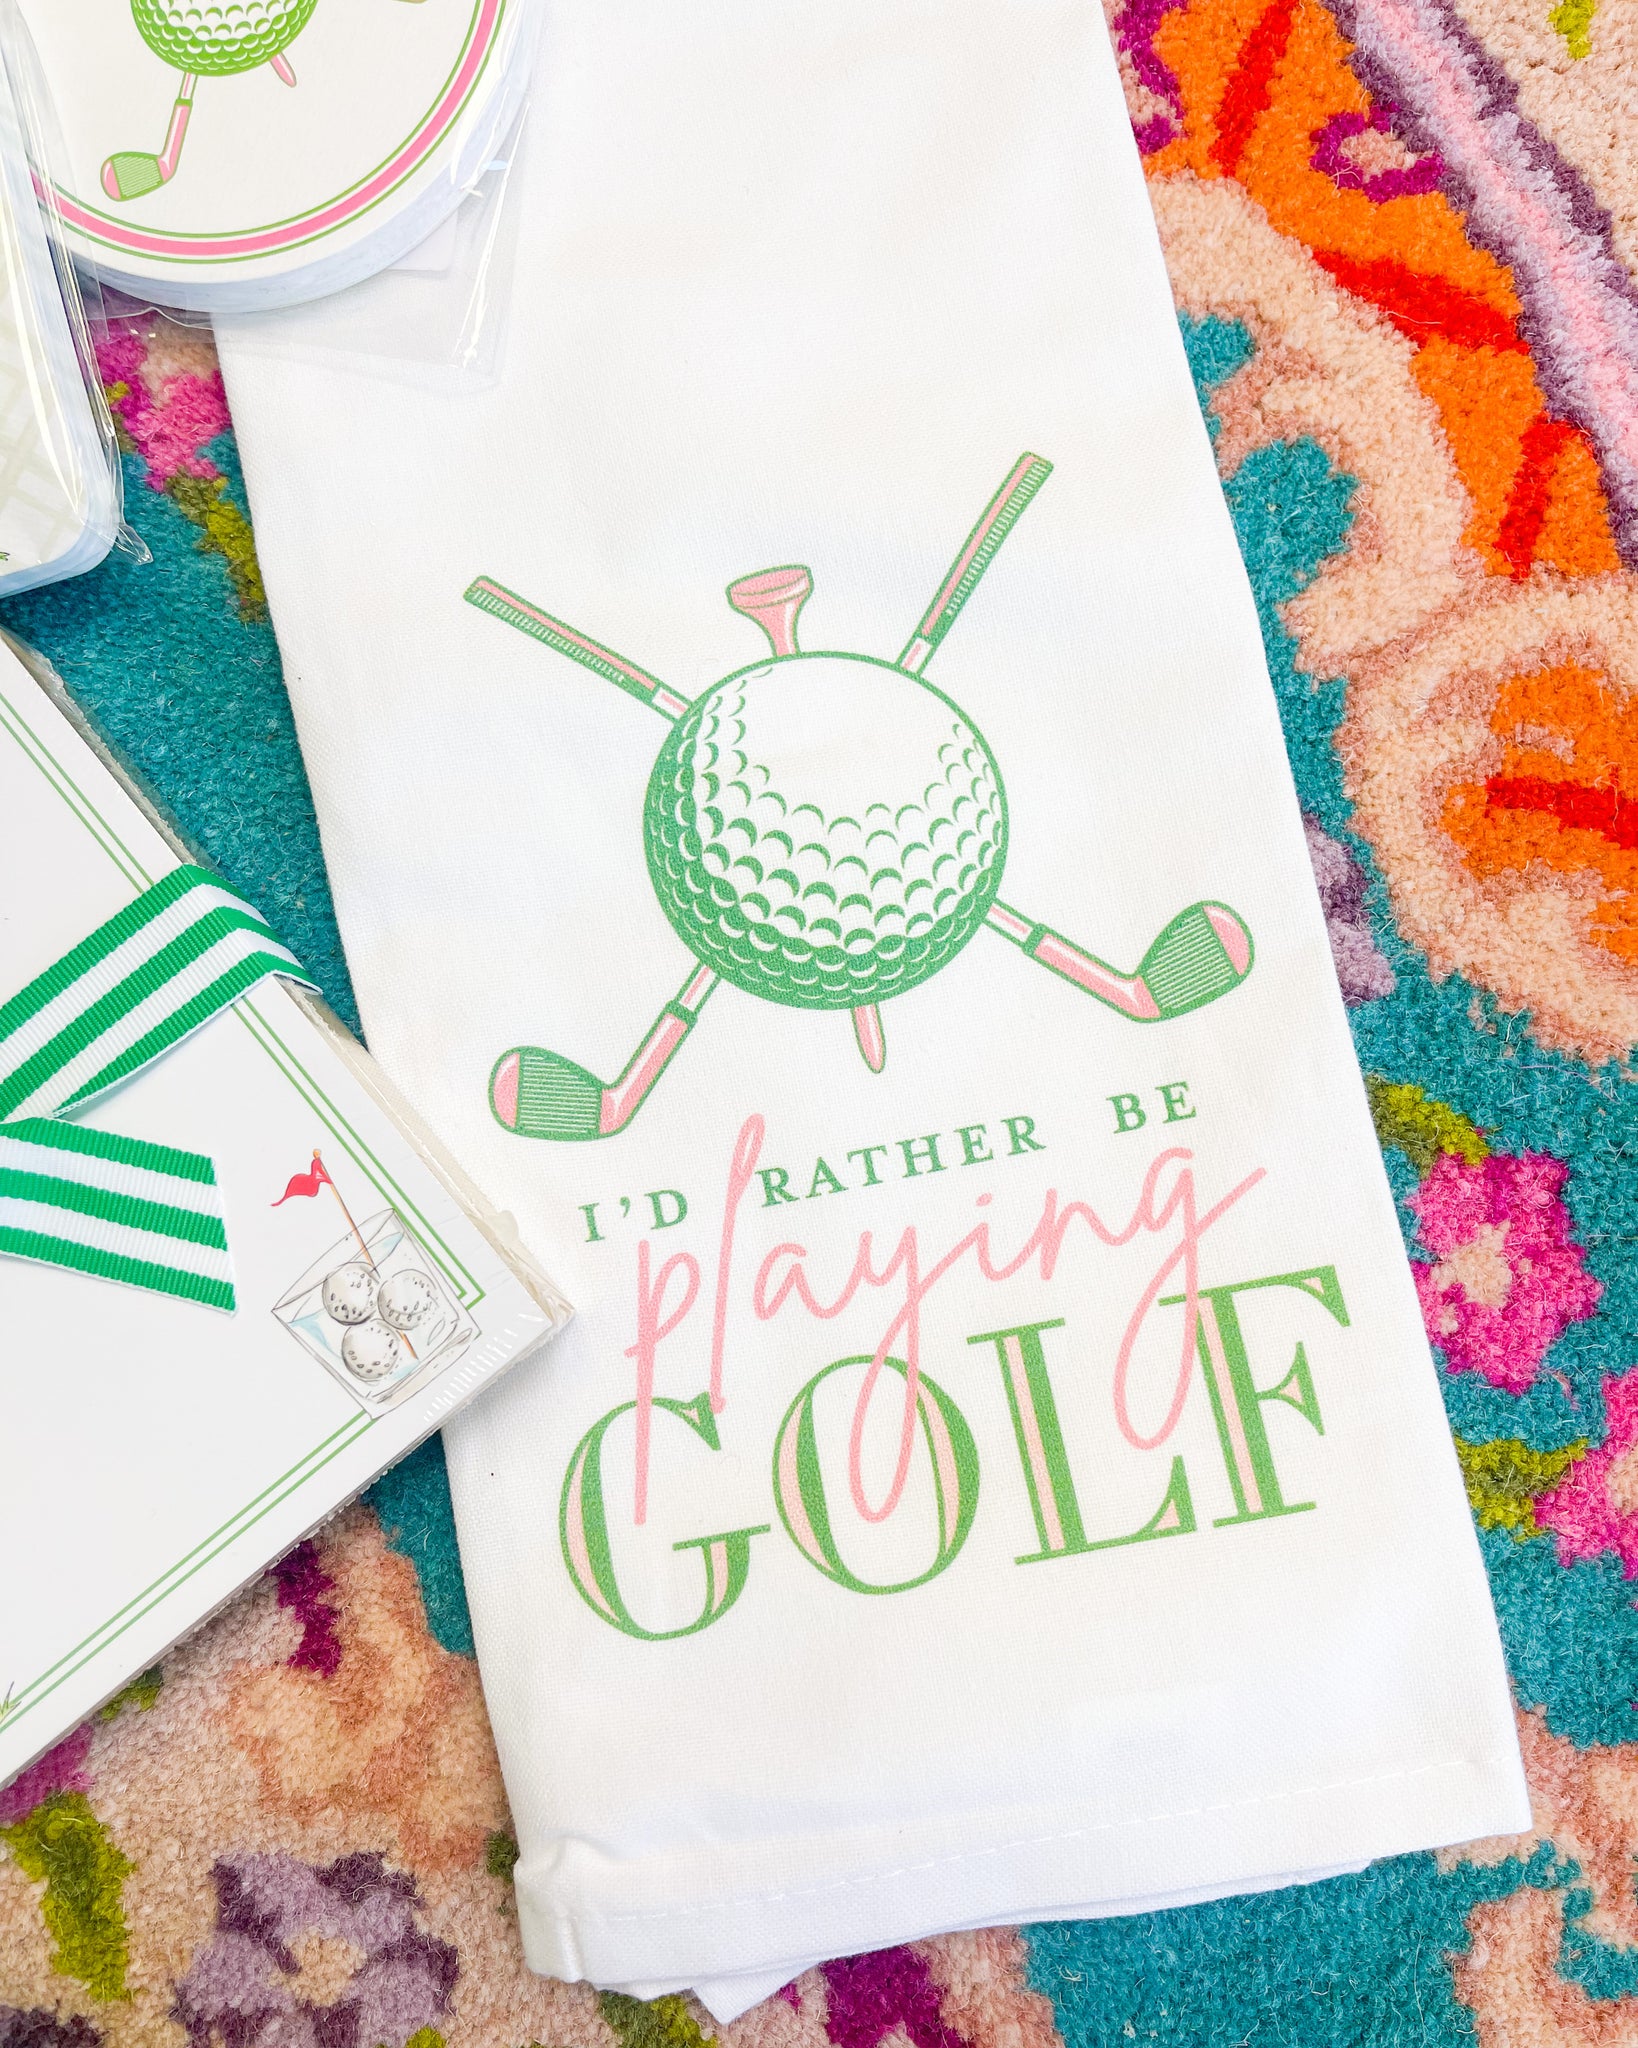 I'd Rather Be Playing Golf Towel